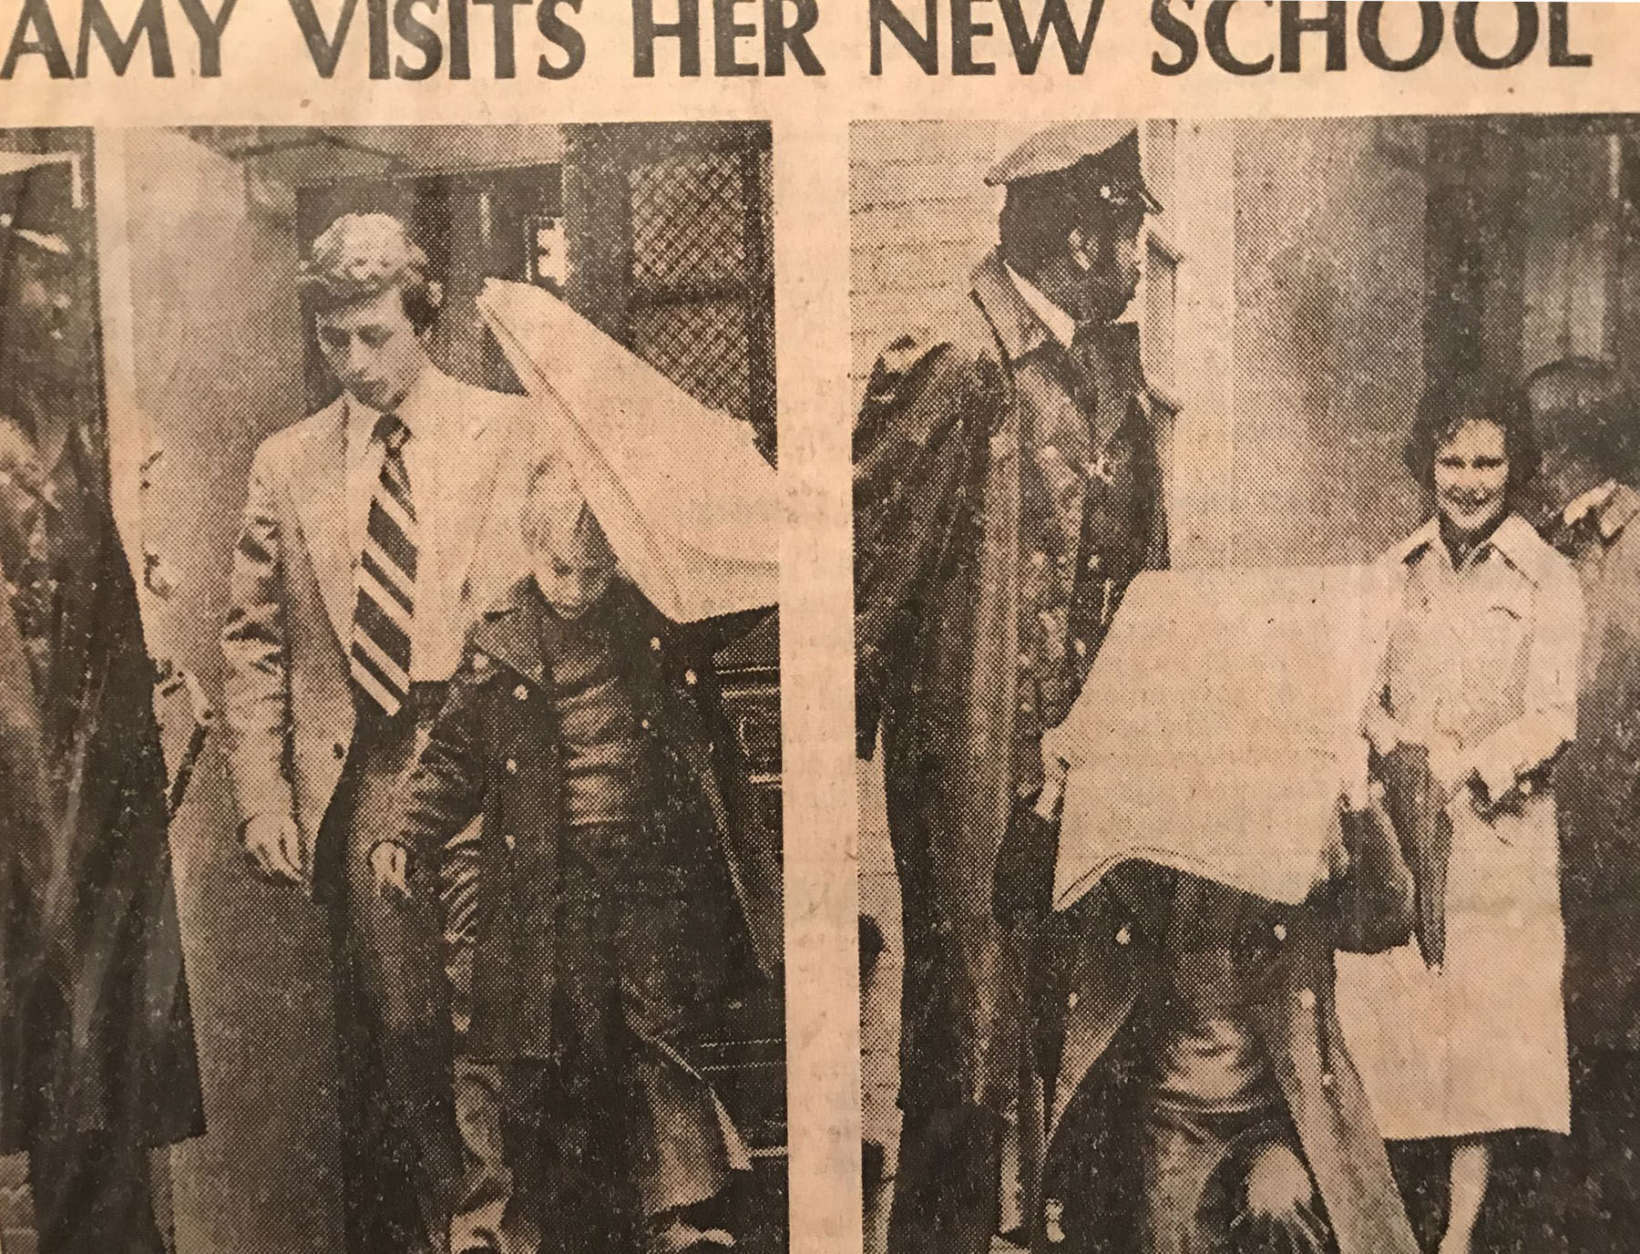 President Jimmy Carter's decision to send Amy to public school was the subject of media attention before she even arrived. In this newspaper photo, taken from one of Verona Meeder's scrapbooks, photographer capture the famously press-shy first daughter visiting her new school. (Courtesy Verona Meeder)